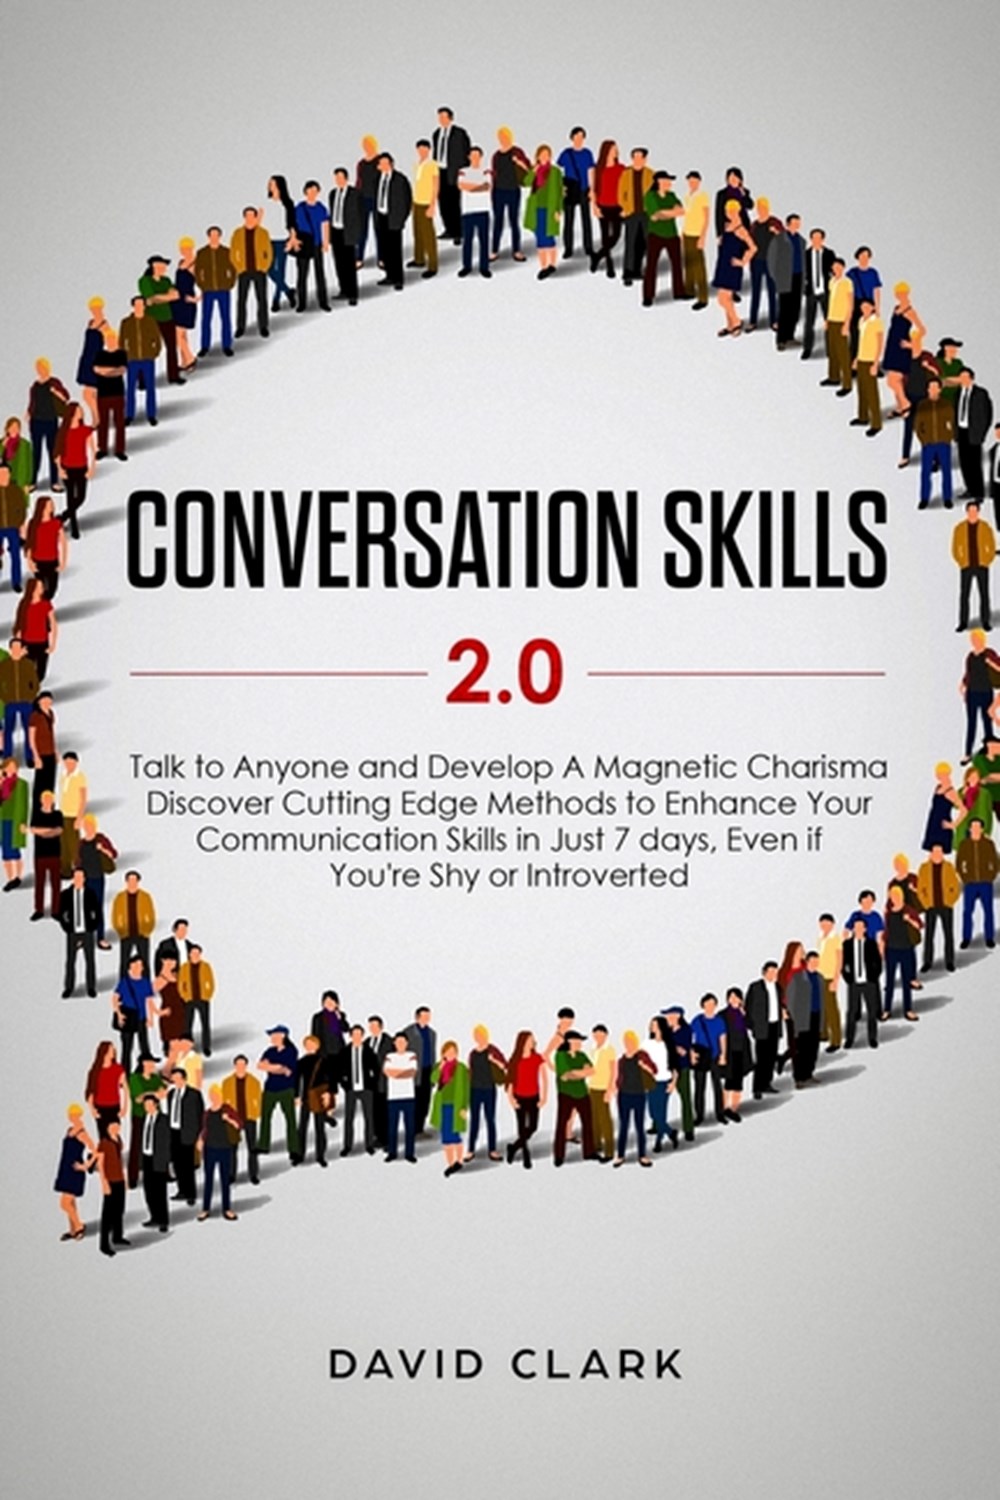 Conversation Skills 2.0 Talk to Anyone and Develop A Magnetic Charisma: Discover Cutting Edge Method